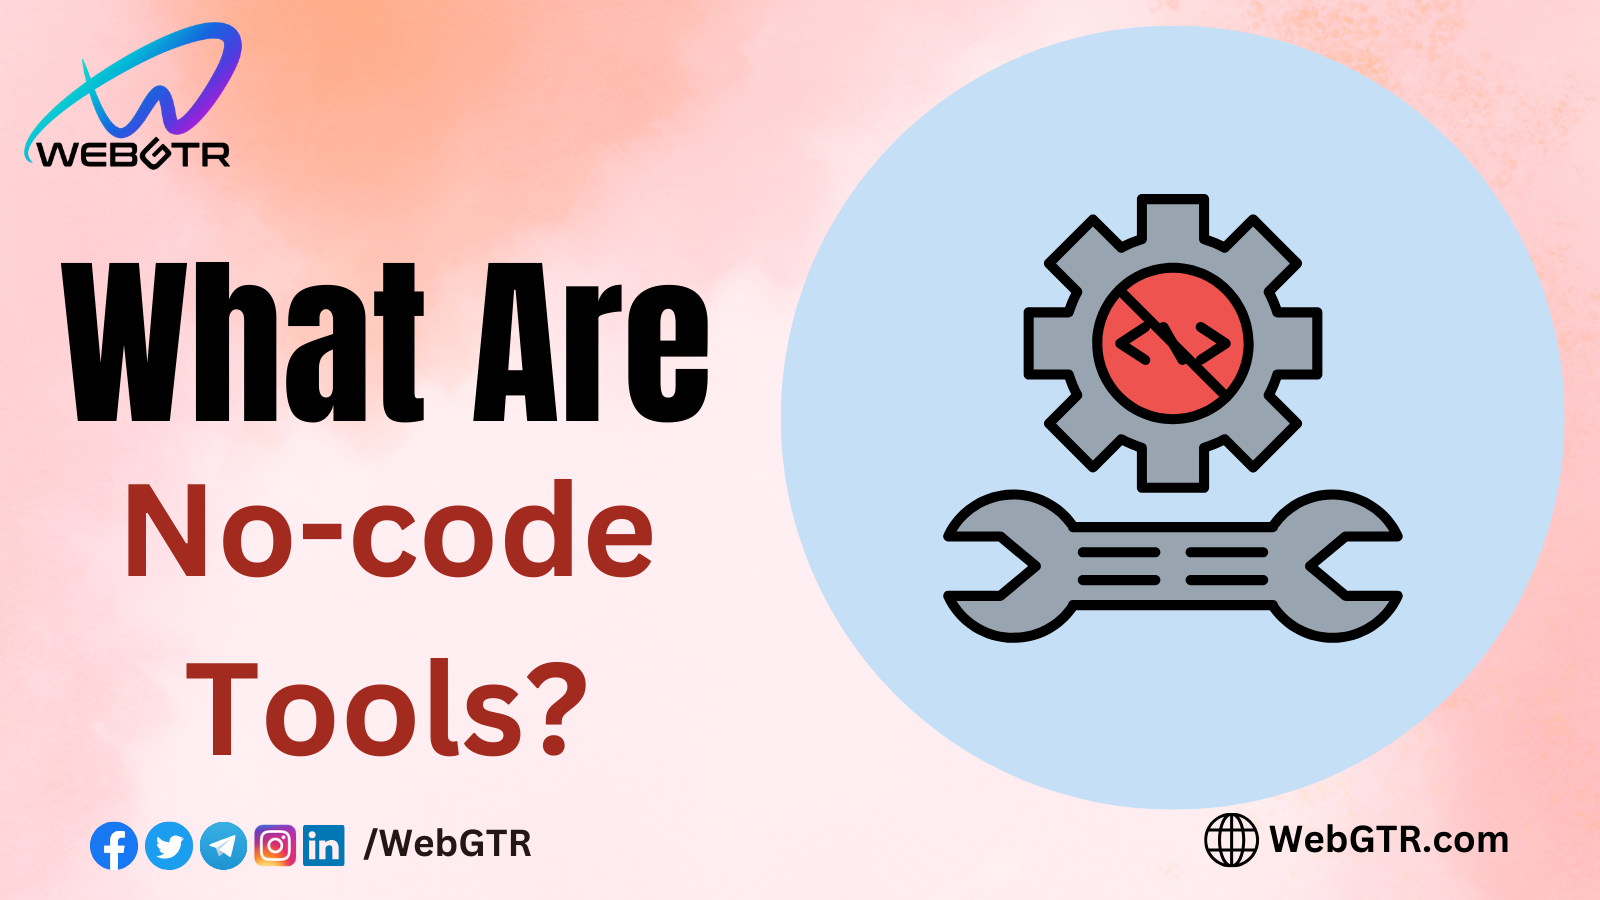 What Are No-code Tools?